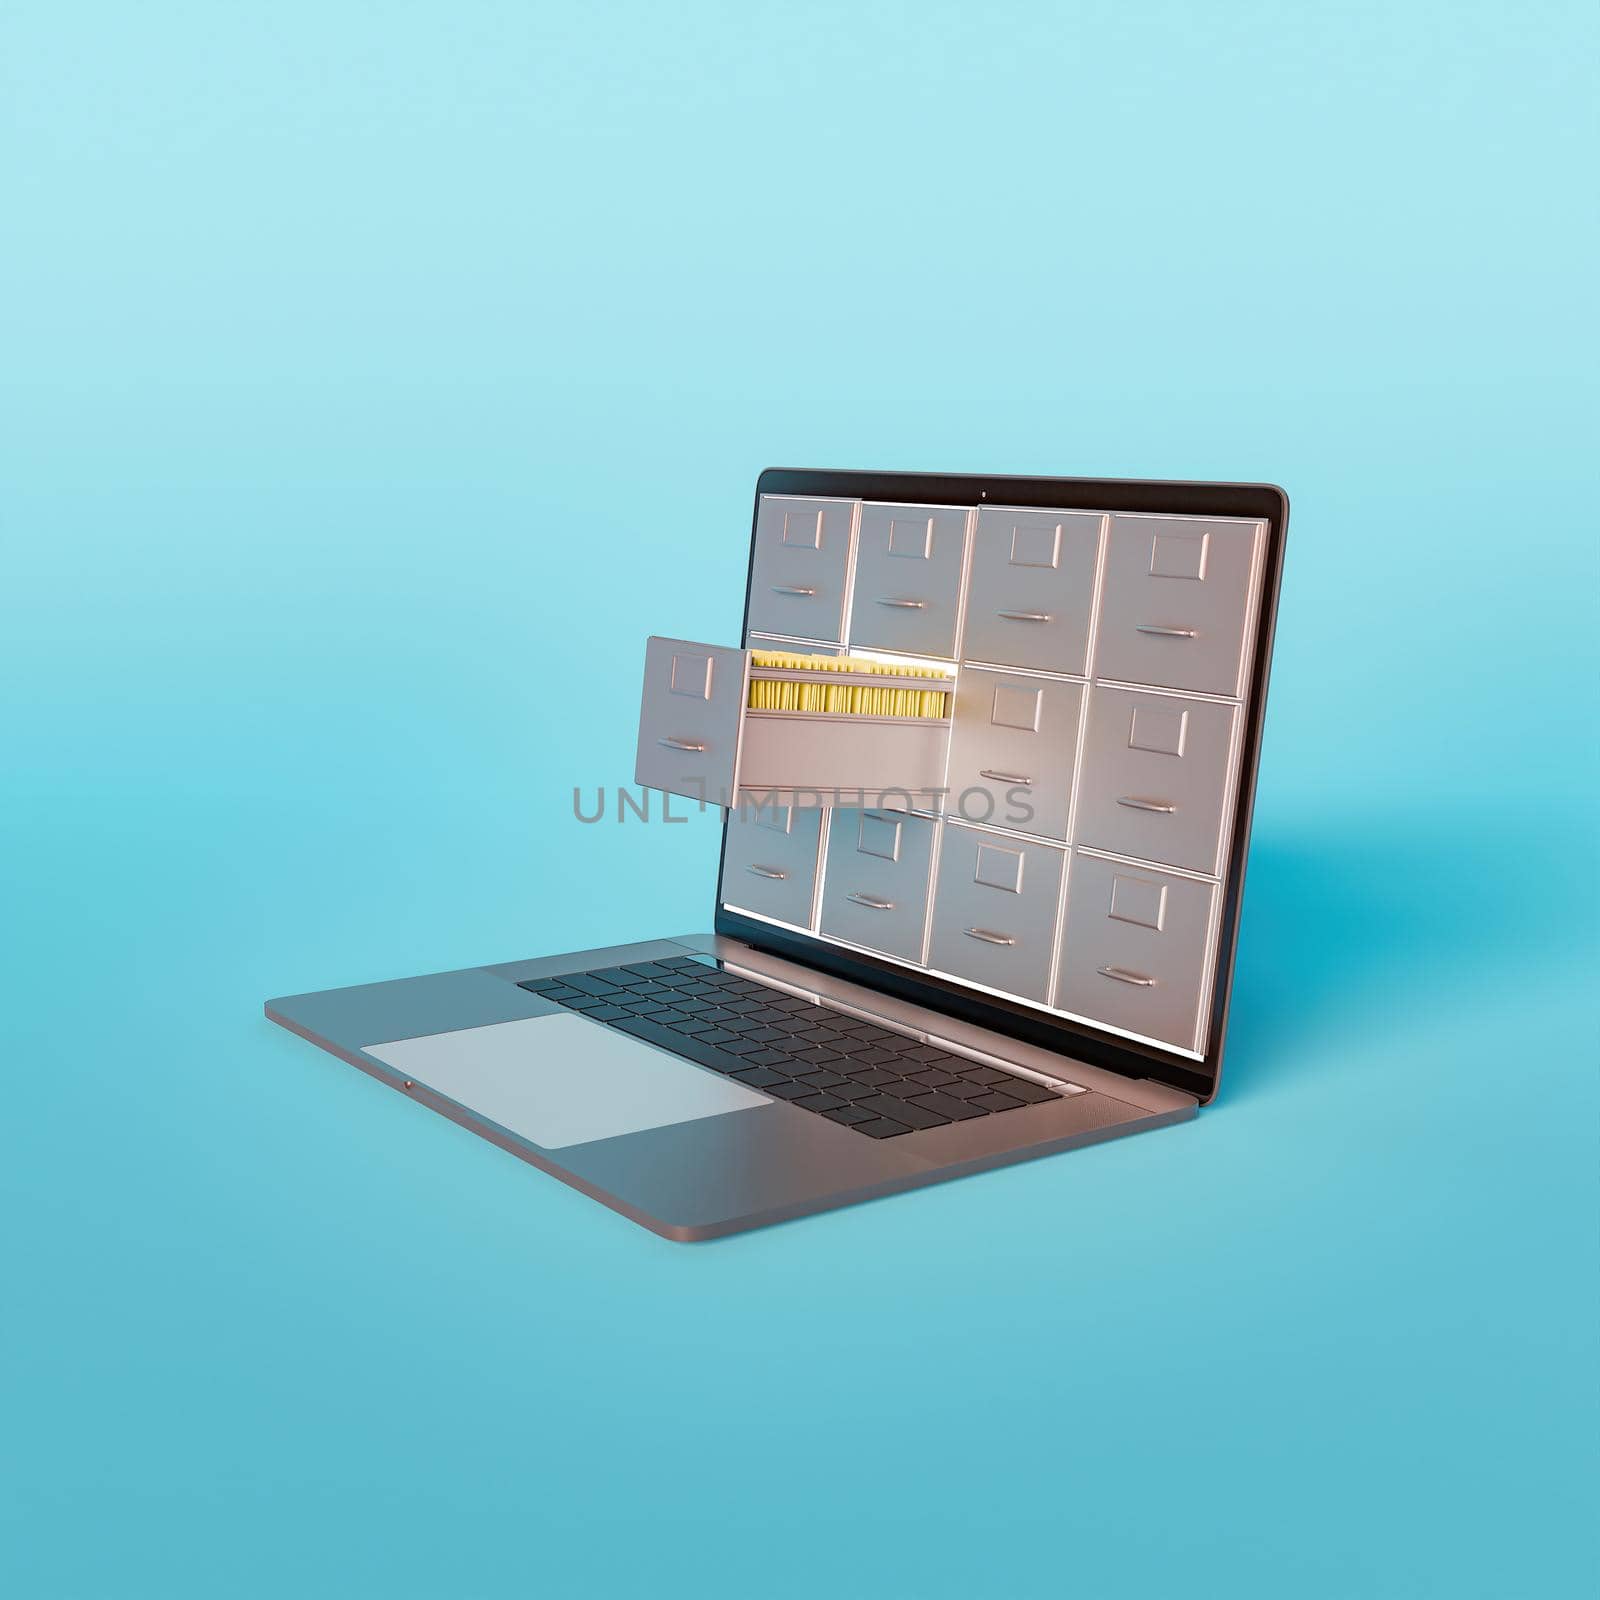 minimalist laptop mockup with file drawers coming out of the screen. online storage concept. 3d render